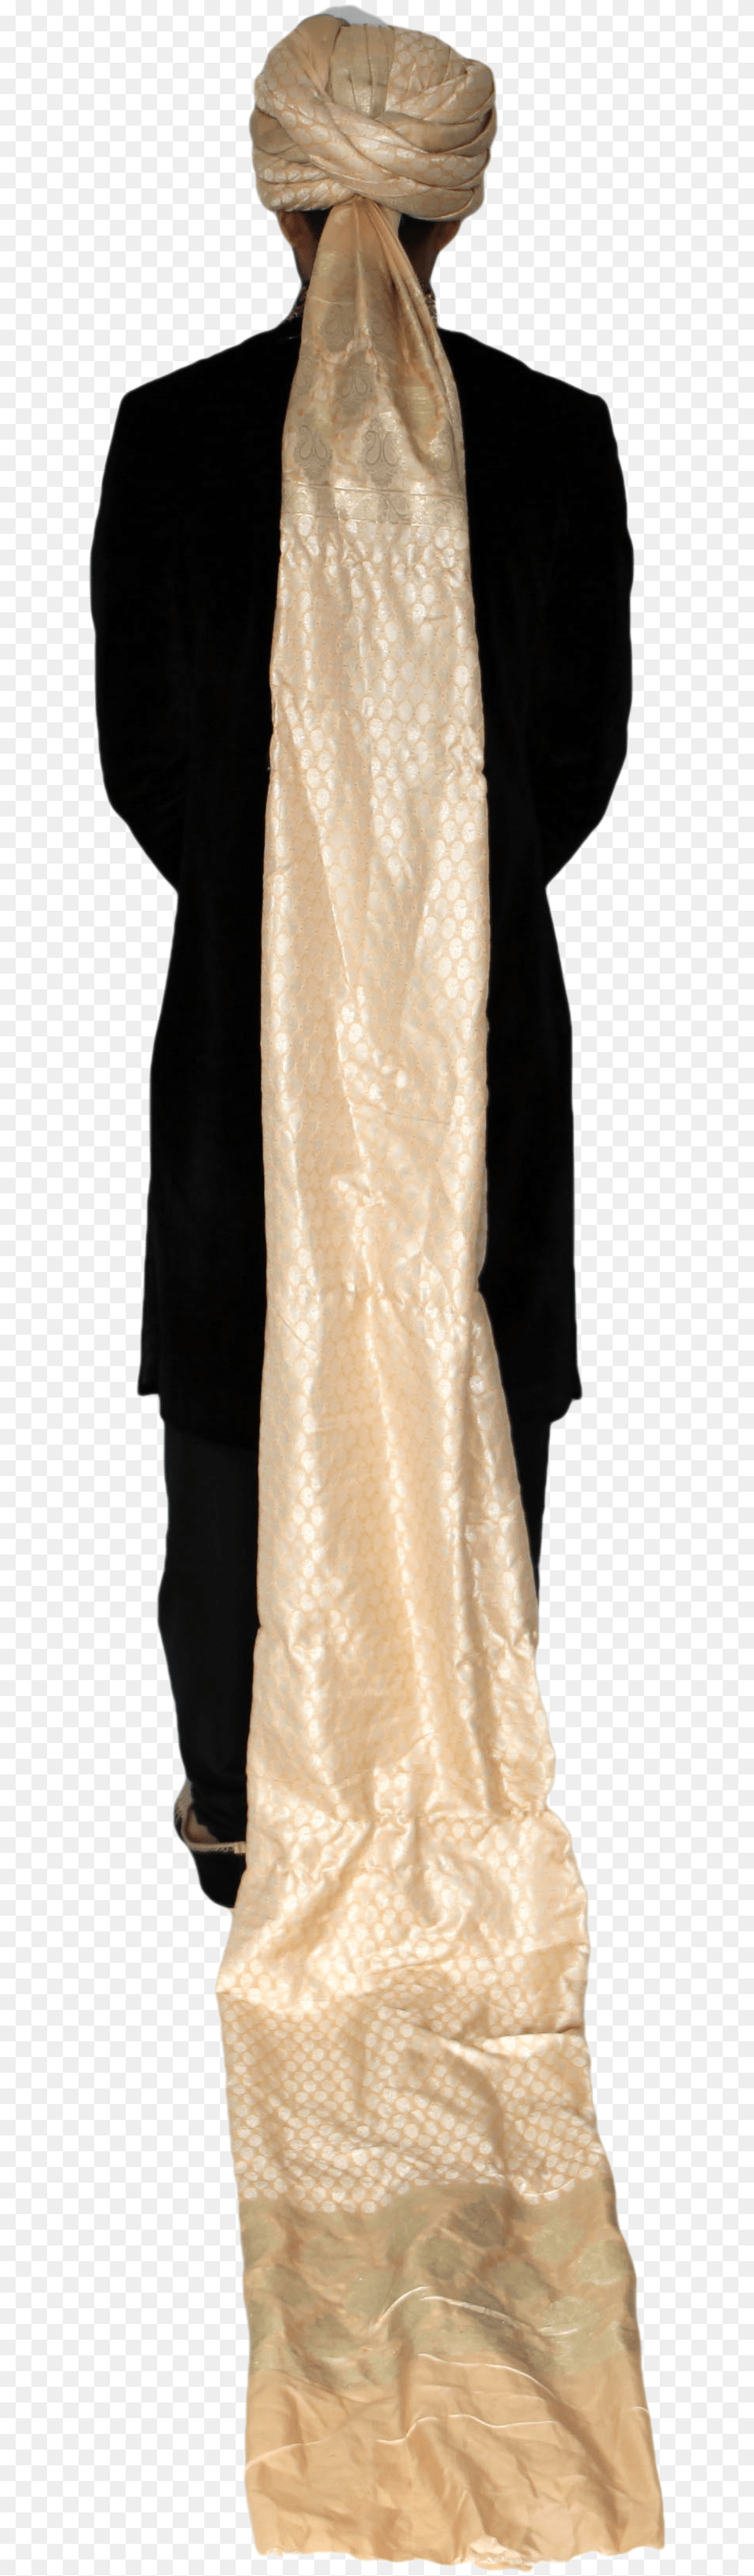 Gold And Champagne Patterned Turban Safa Hat Cape, Clothing, Scarf, Stole, Adult Png Image